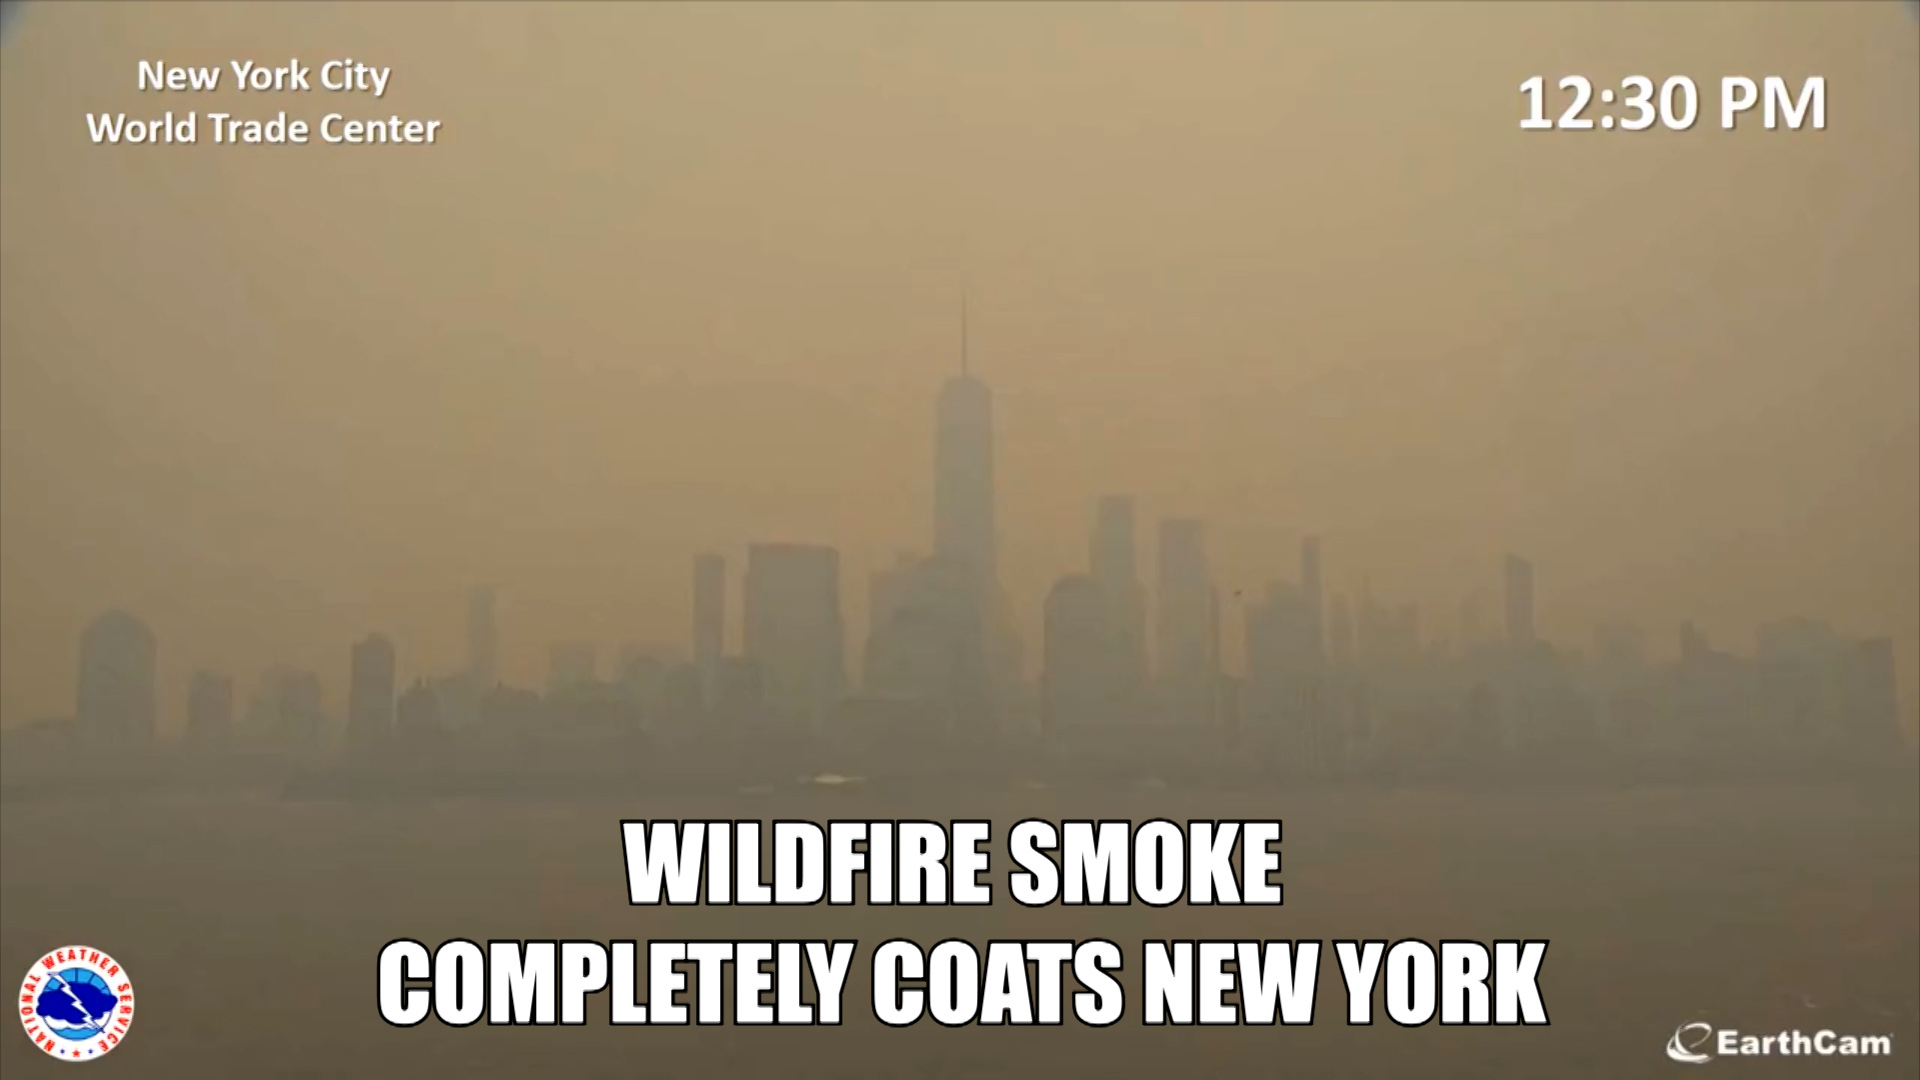 Yankees vs. White Sox game postponed due to unbreathable air in NYC due to  smoke from Canadian wildfires